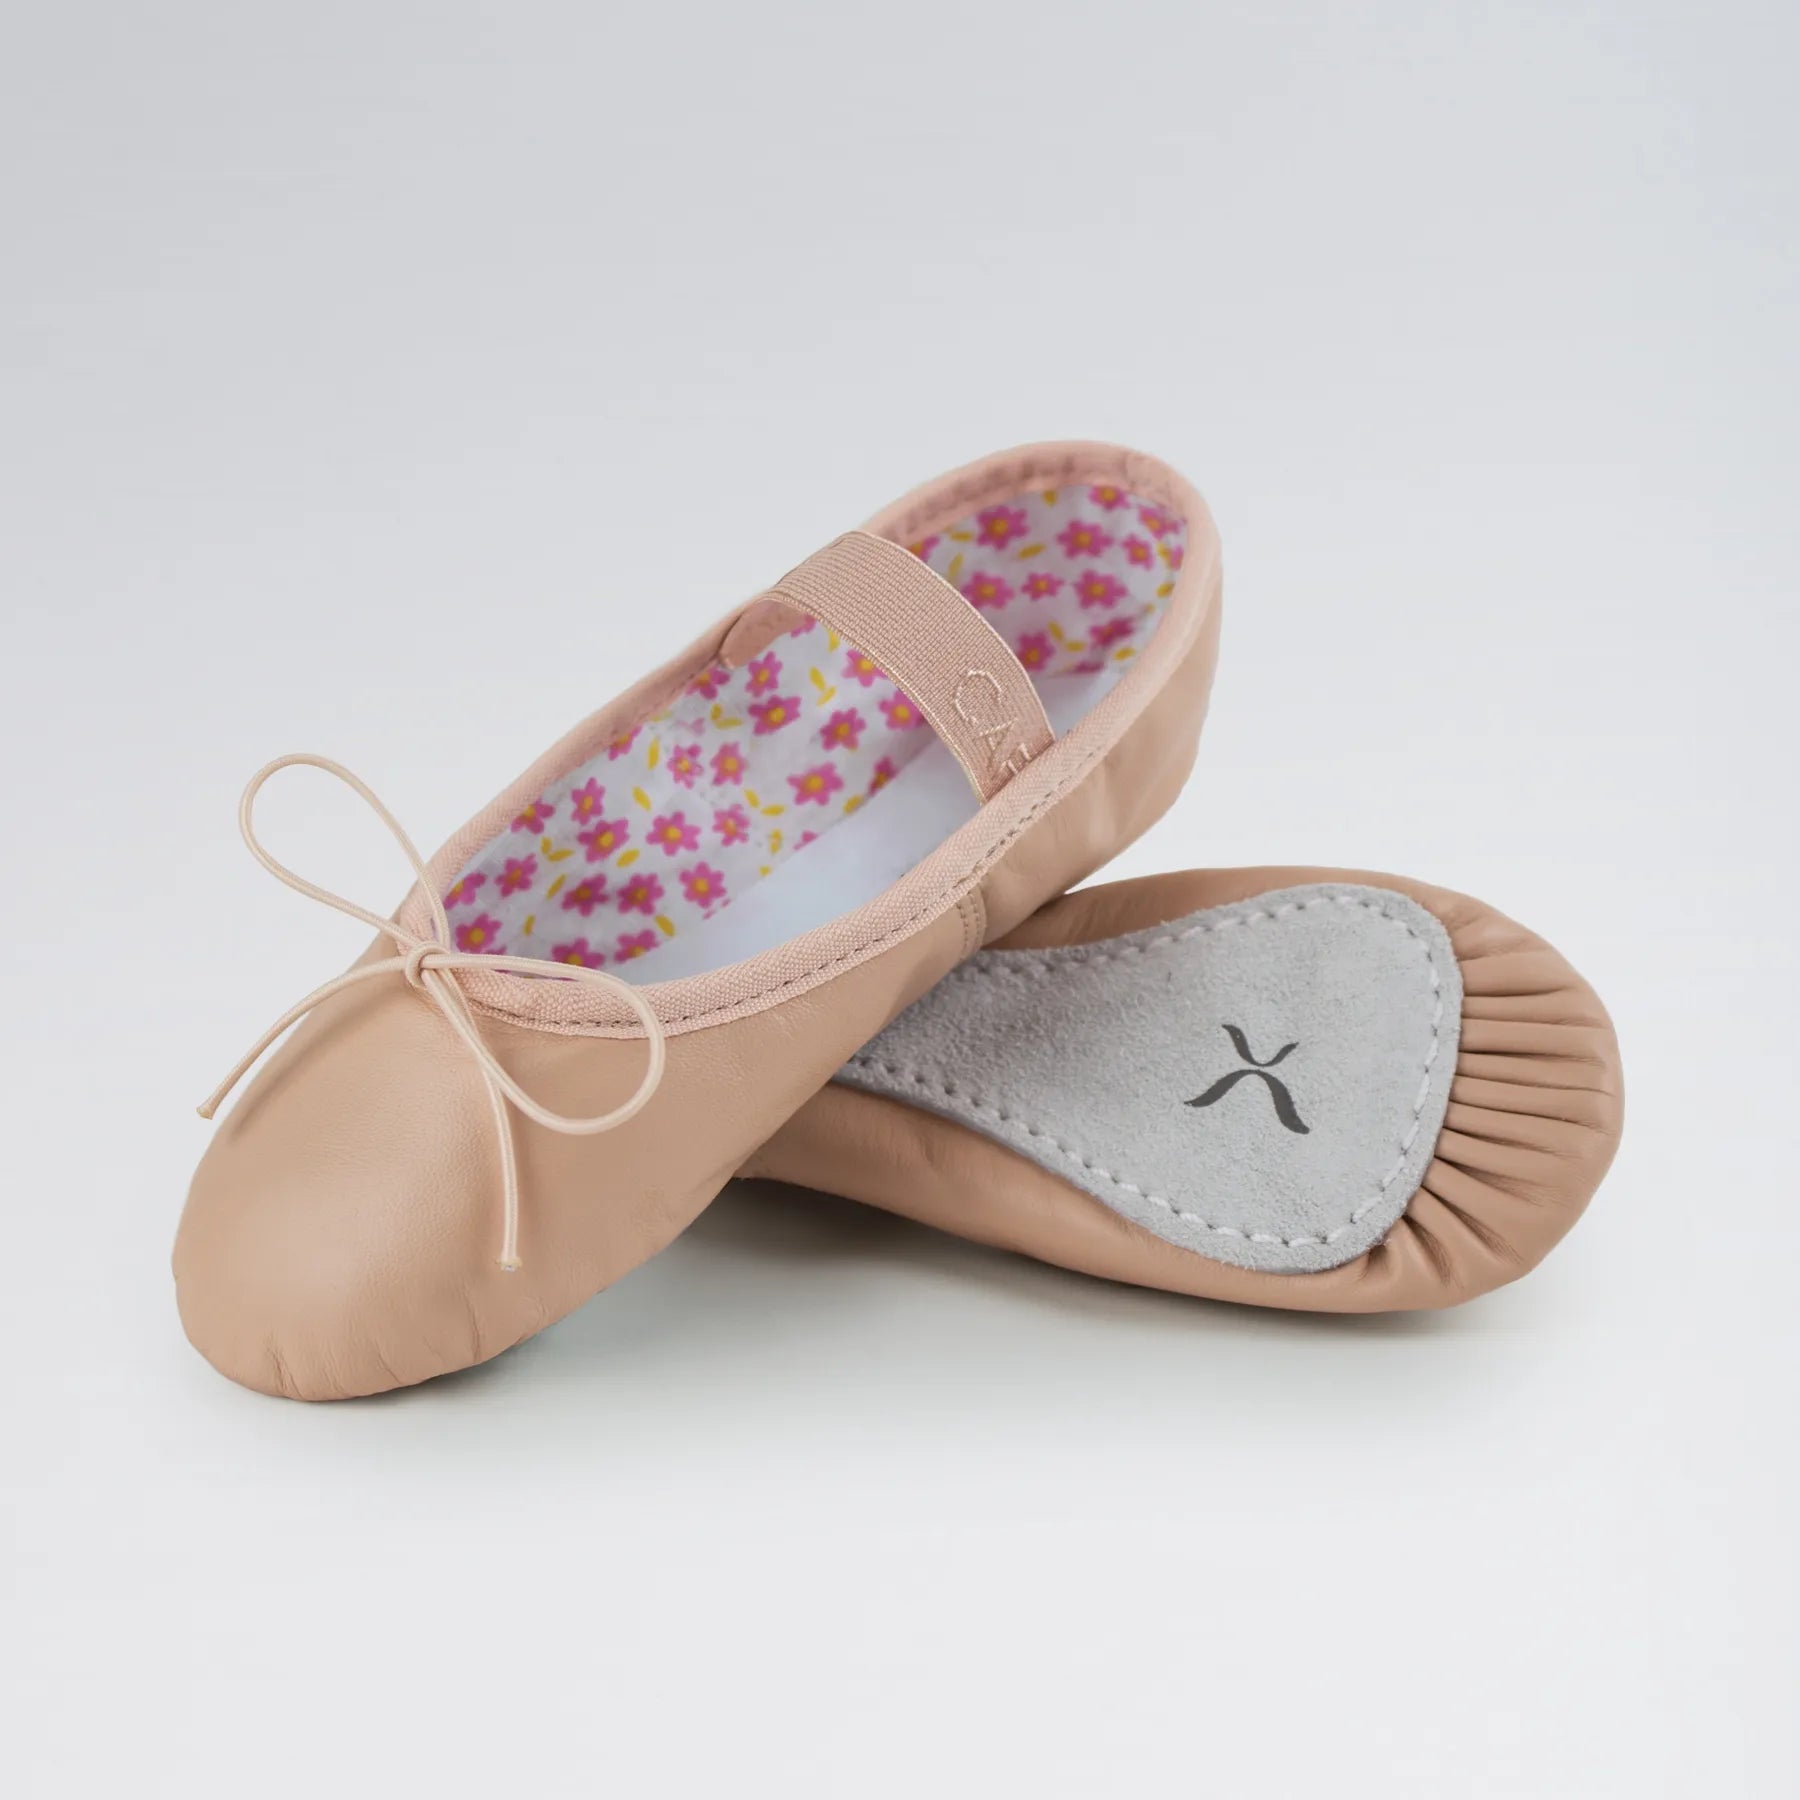 'Daisy' Pink Leather Ballet Shoes